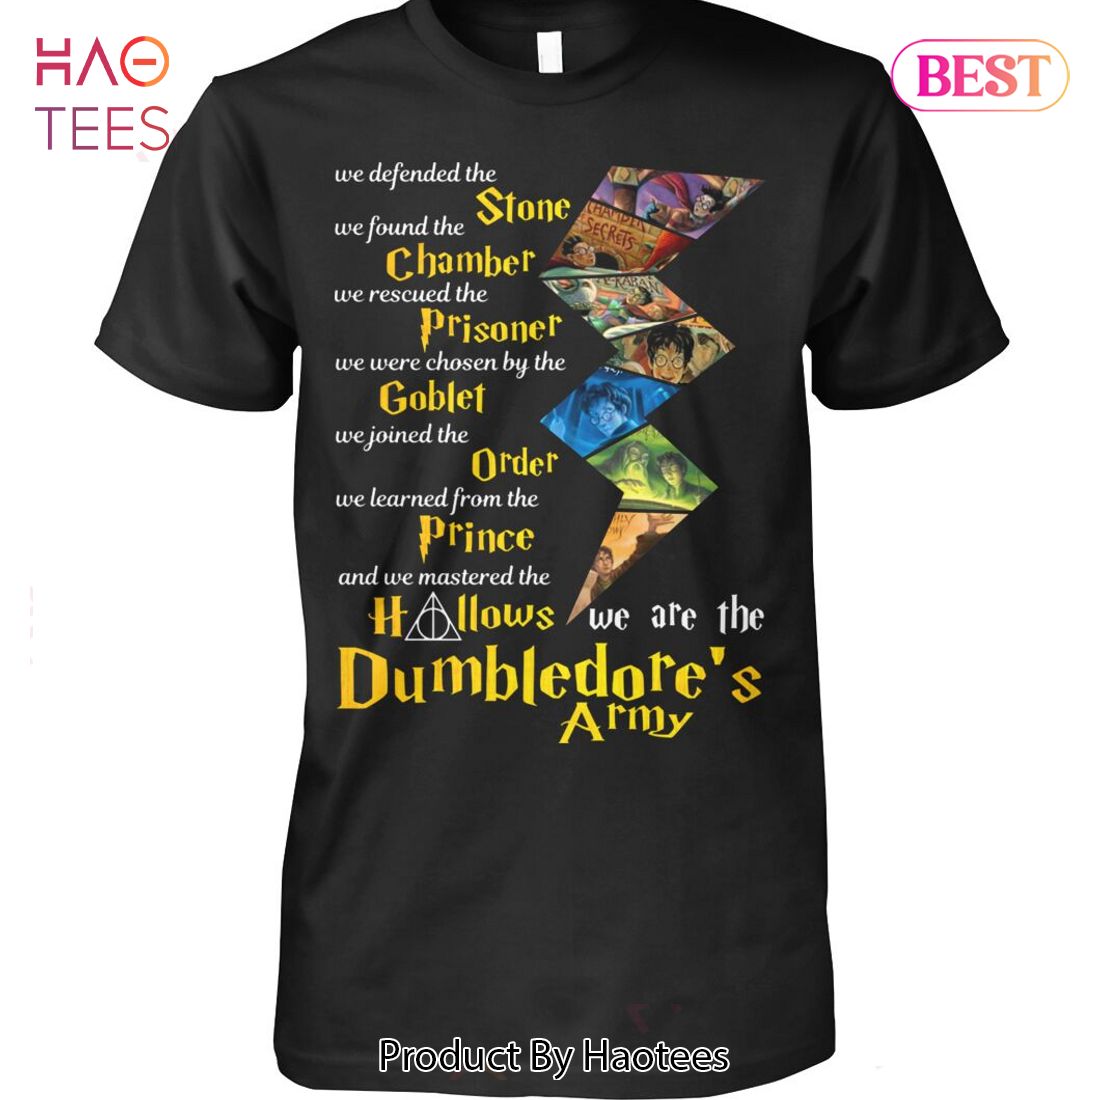 NEW We Are Dumbledore s Army Unisex T-Shirt